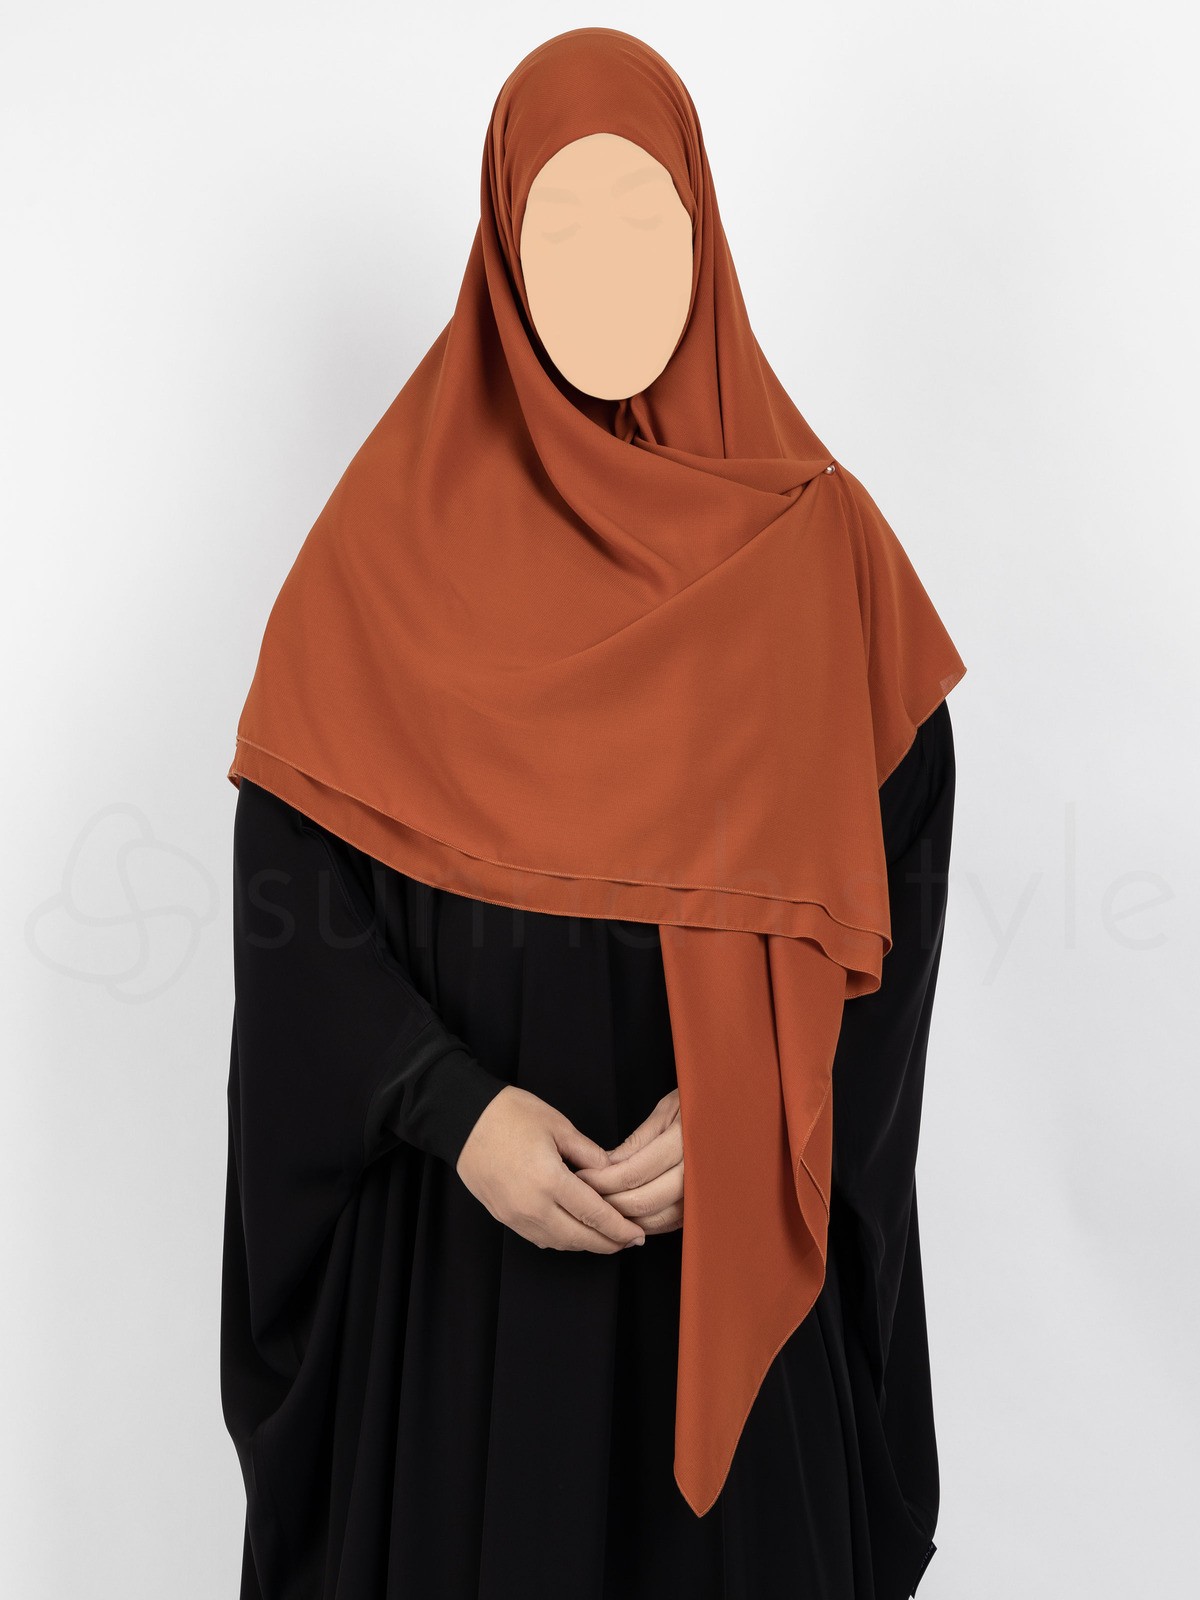 Sunnah Style - Essentials Square Hijab (Chiffon) - Large (Sterling)